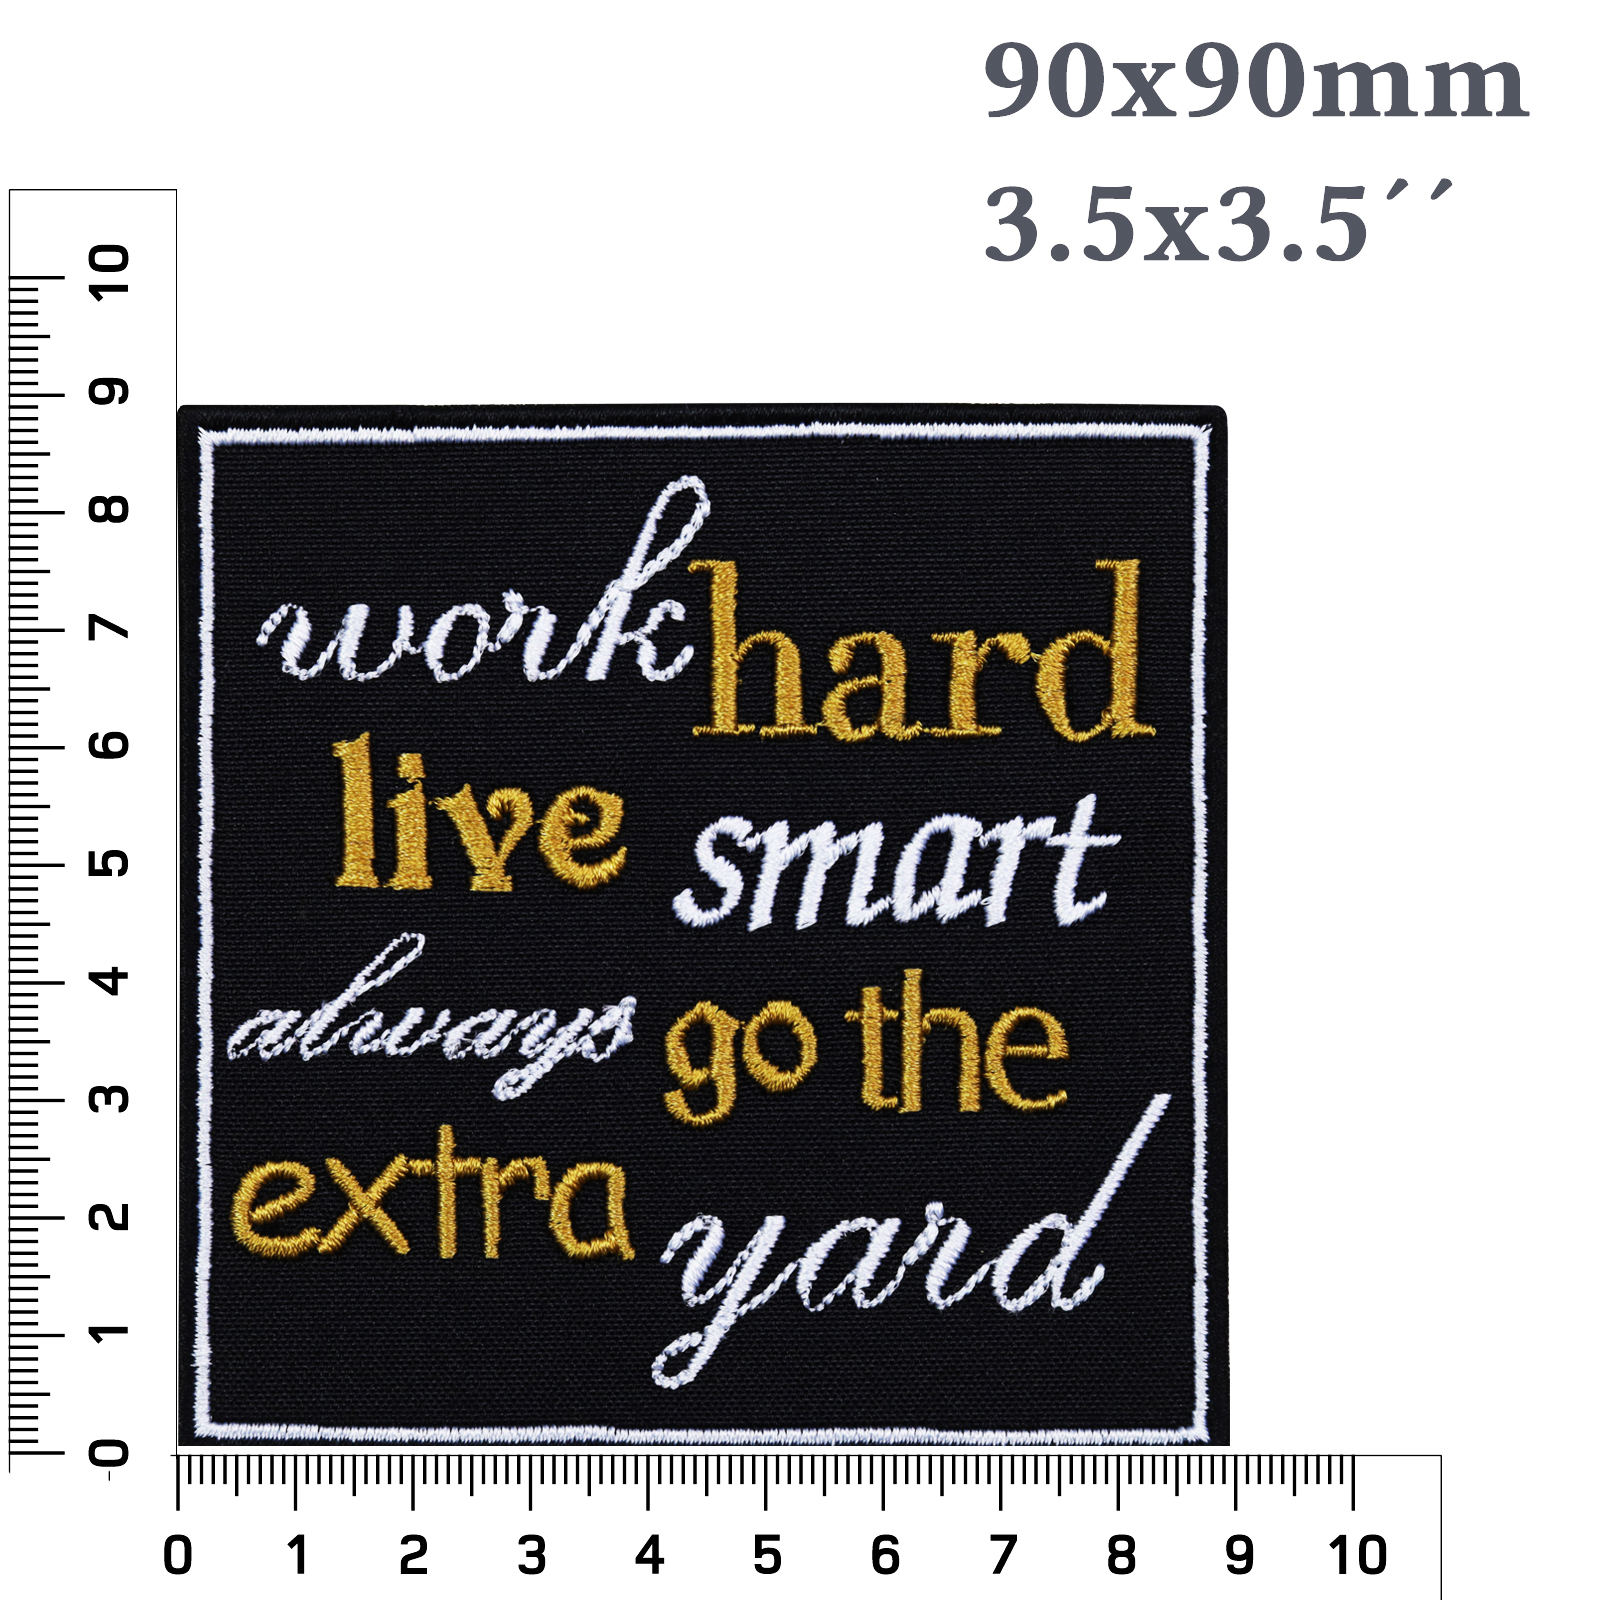 Work hard - live smart - akways go to the extra yard - Patch